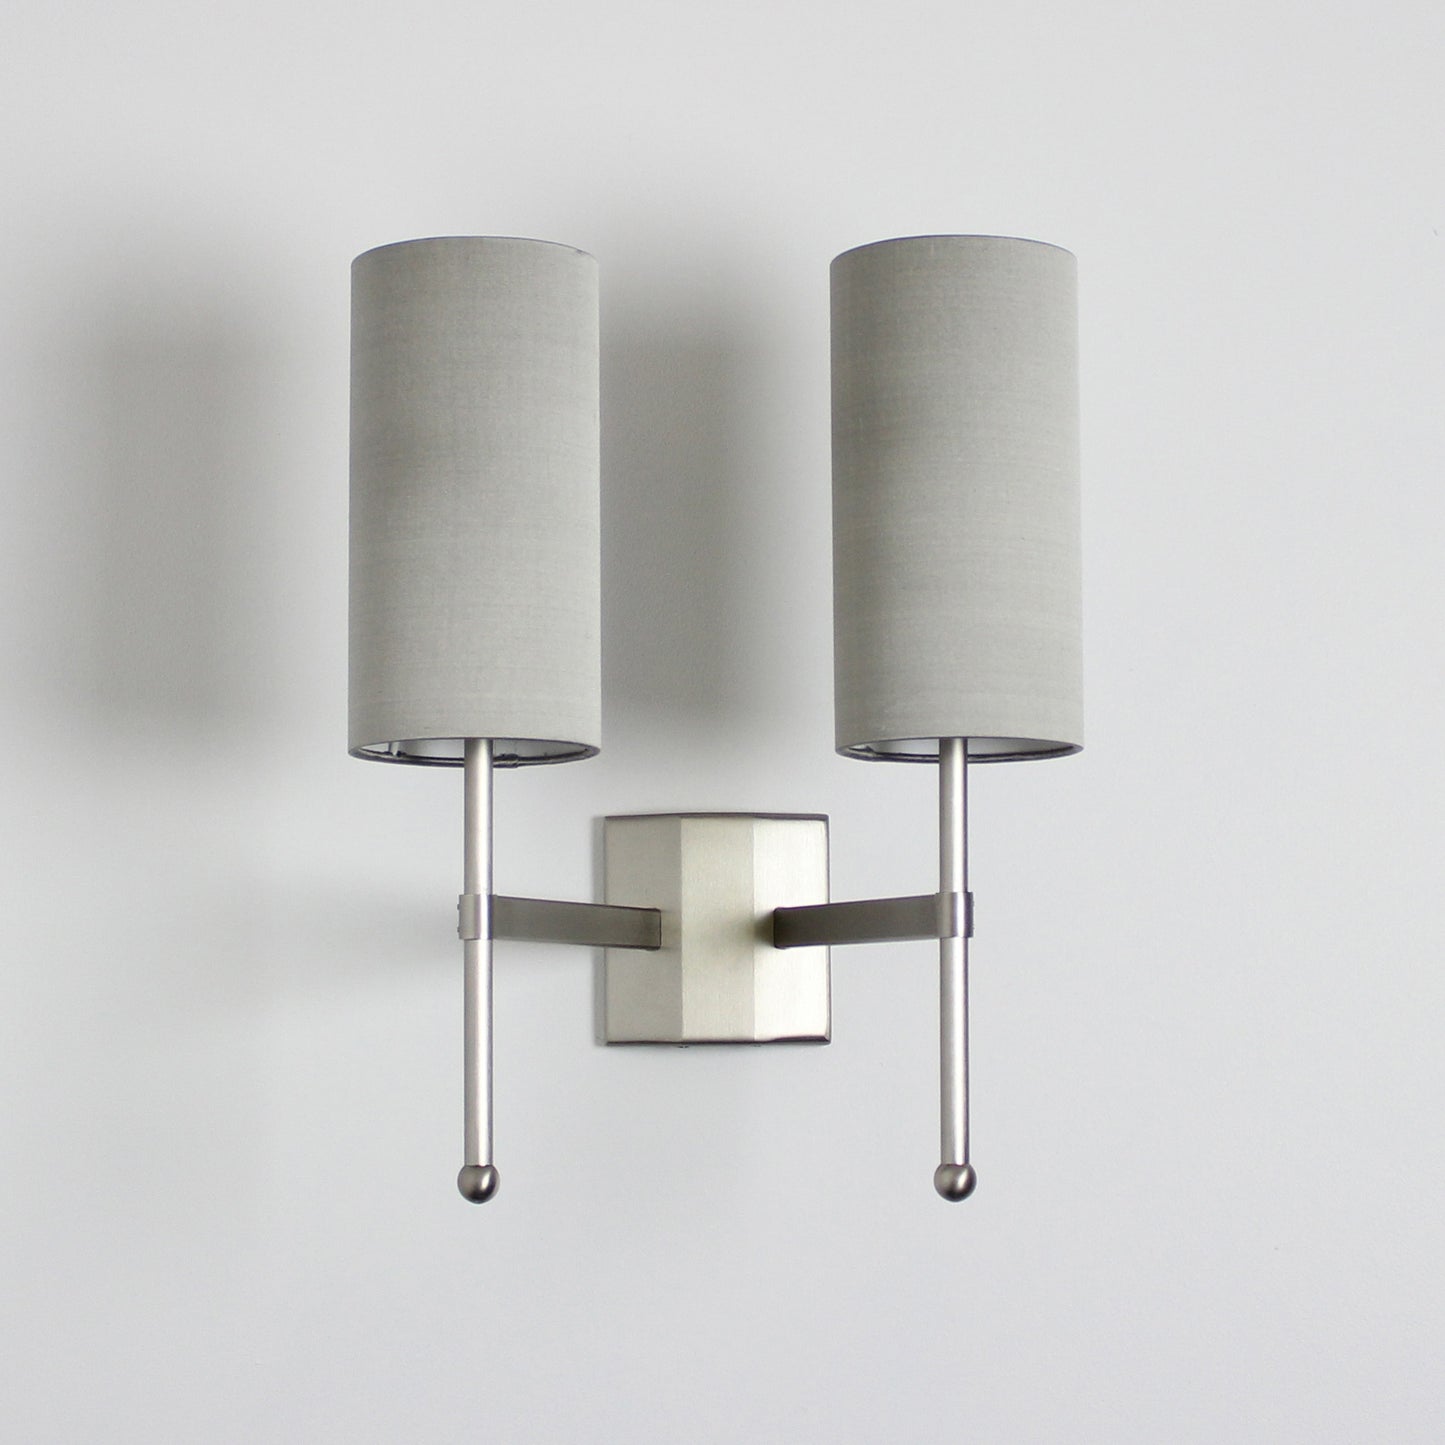 Double Stem Wall Light in Flat Nickel with Birch Silk Shades - 693, 623